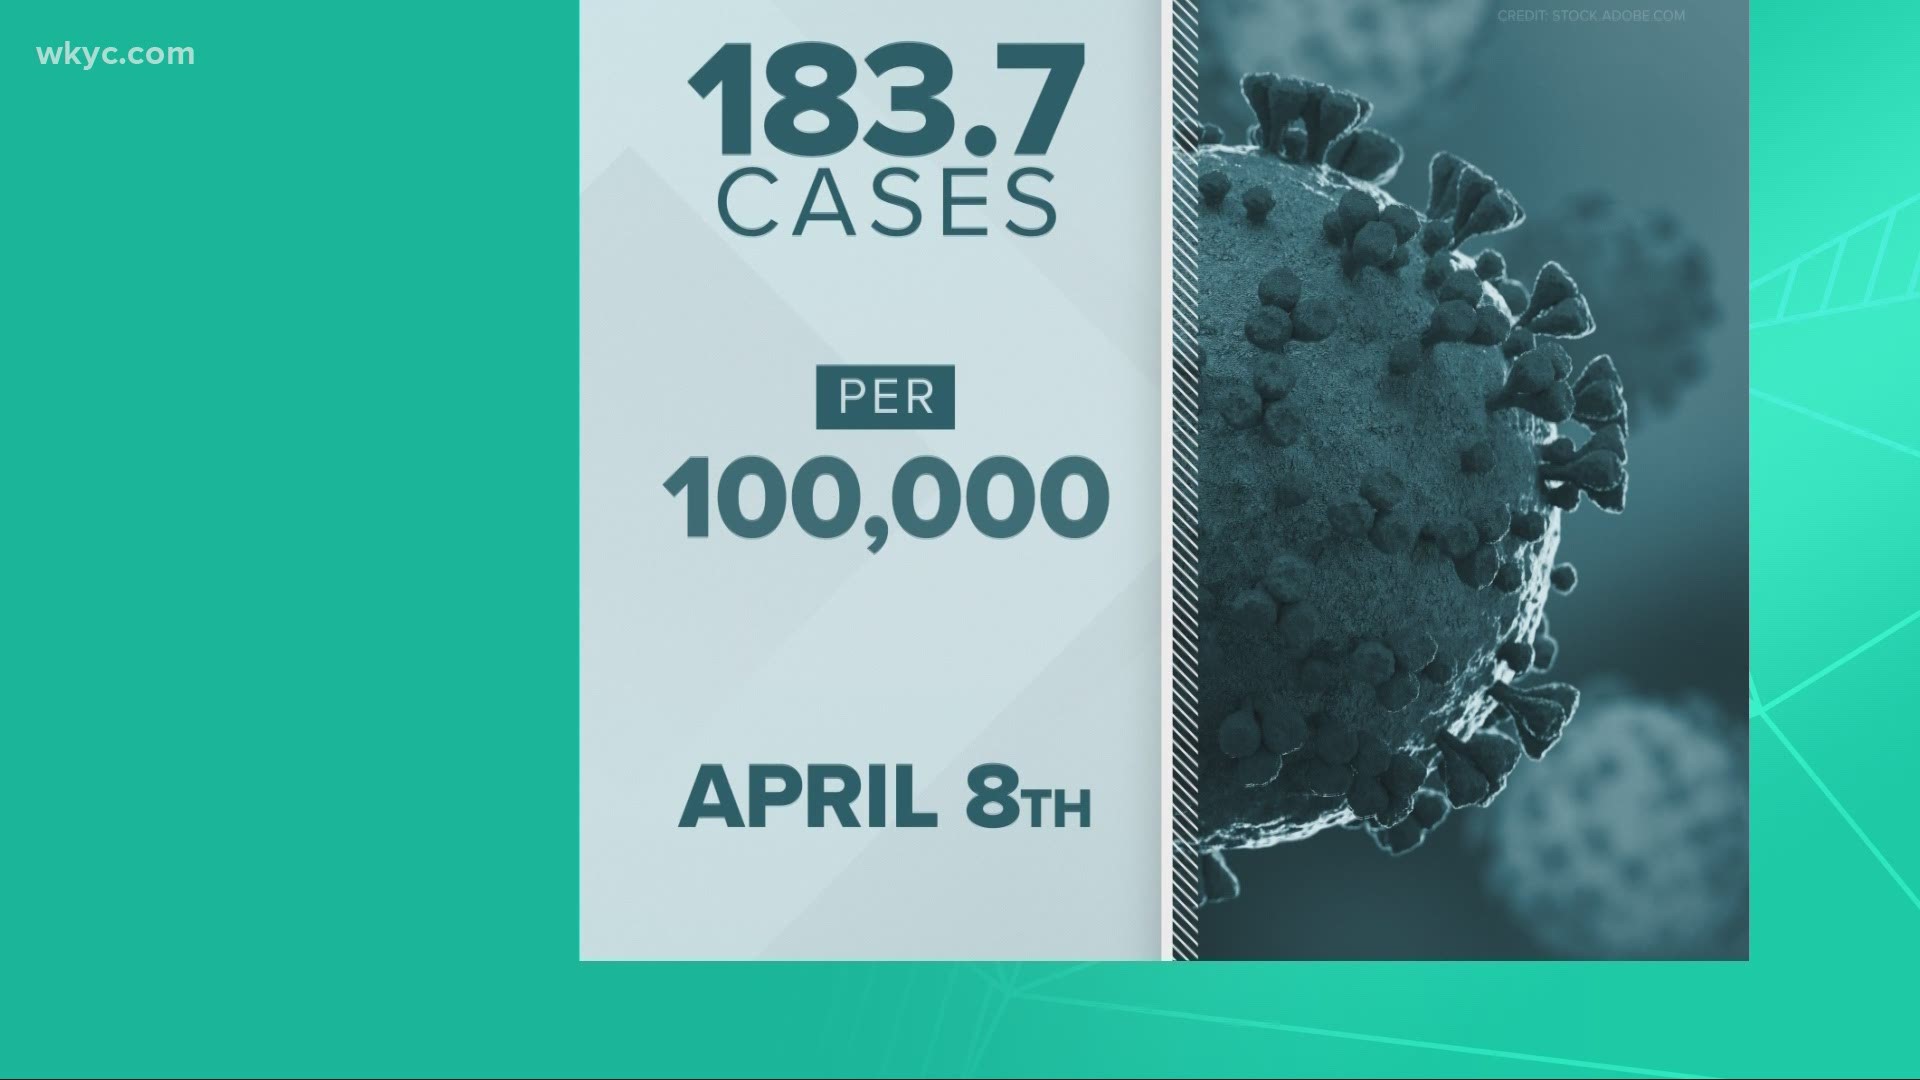 On Thursday, Ohio reported nearly 3,000 new cases in a 24-hour period.